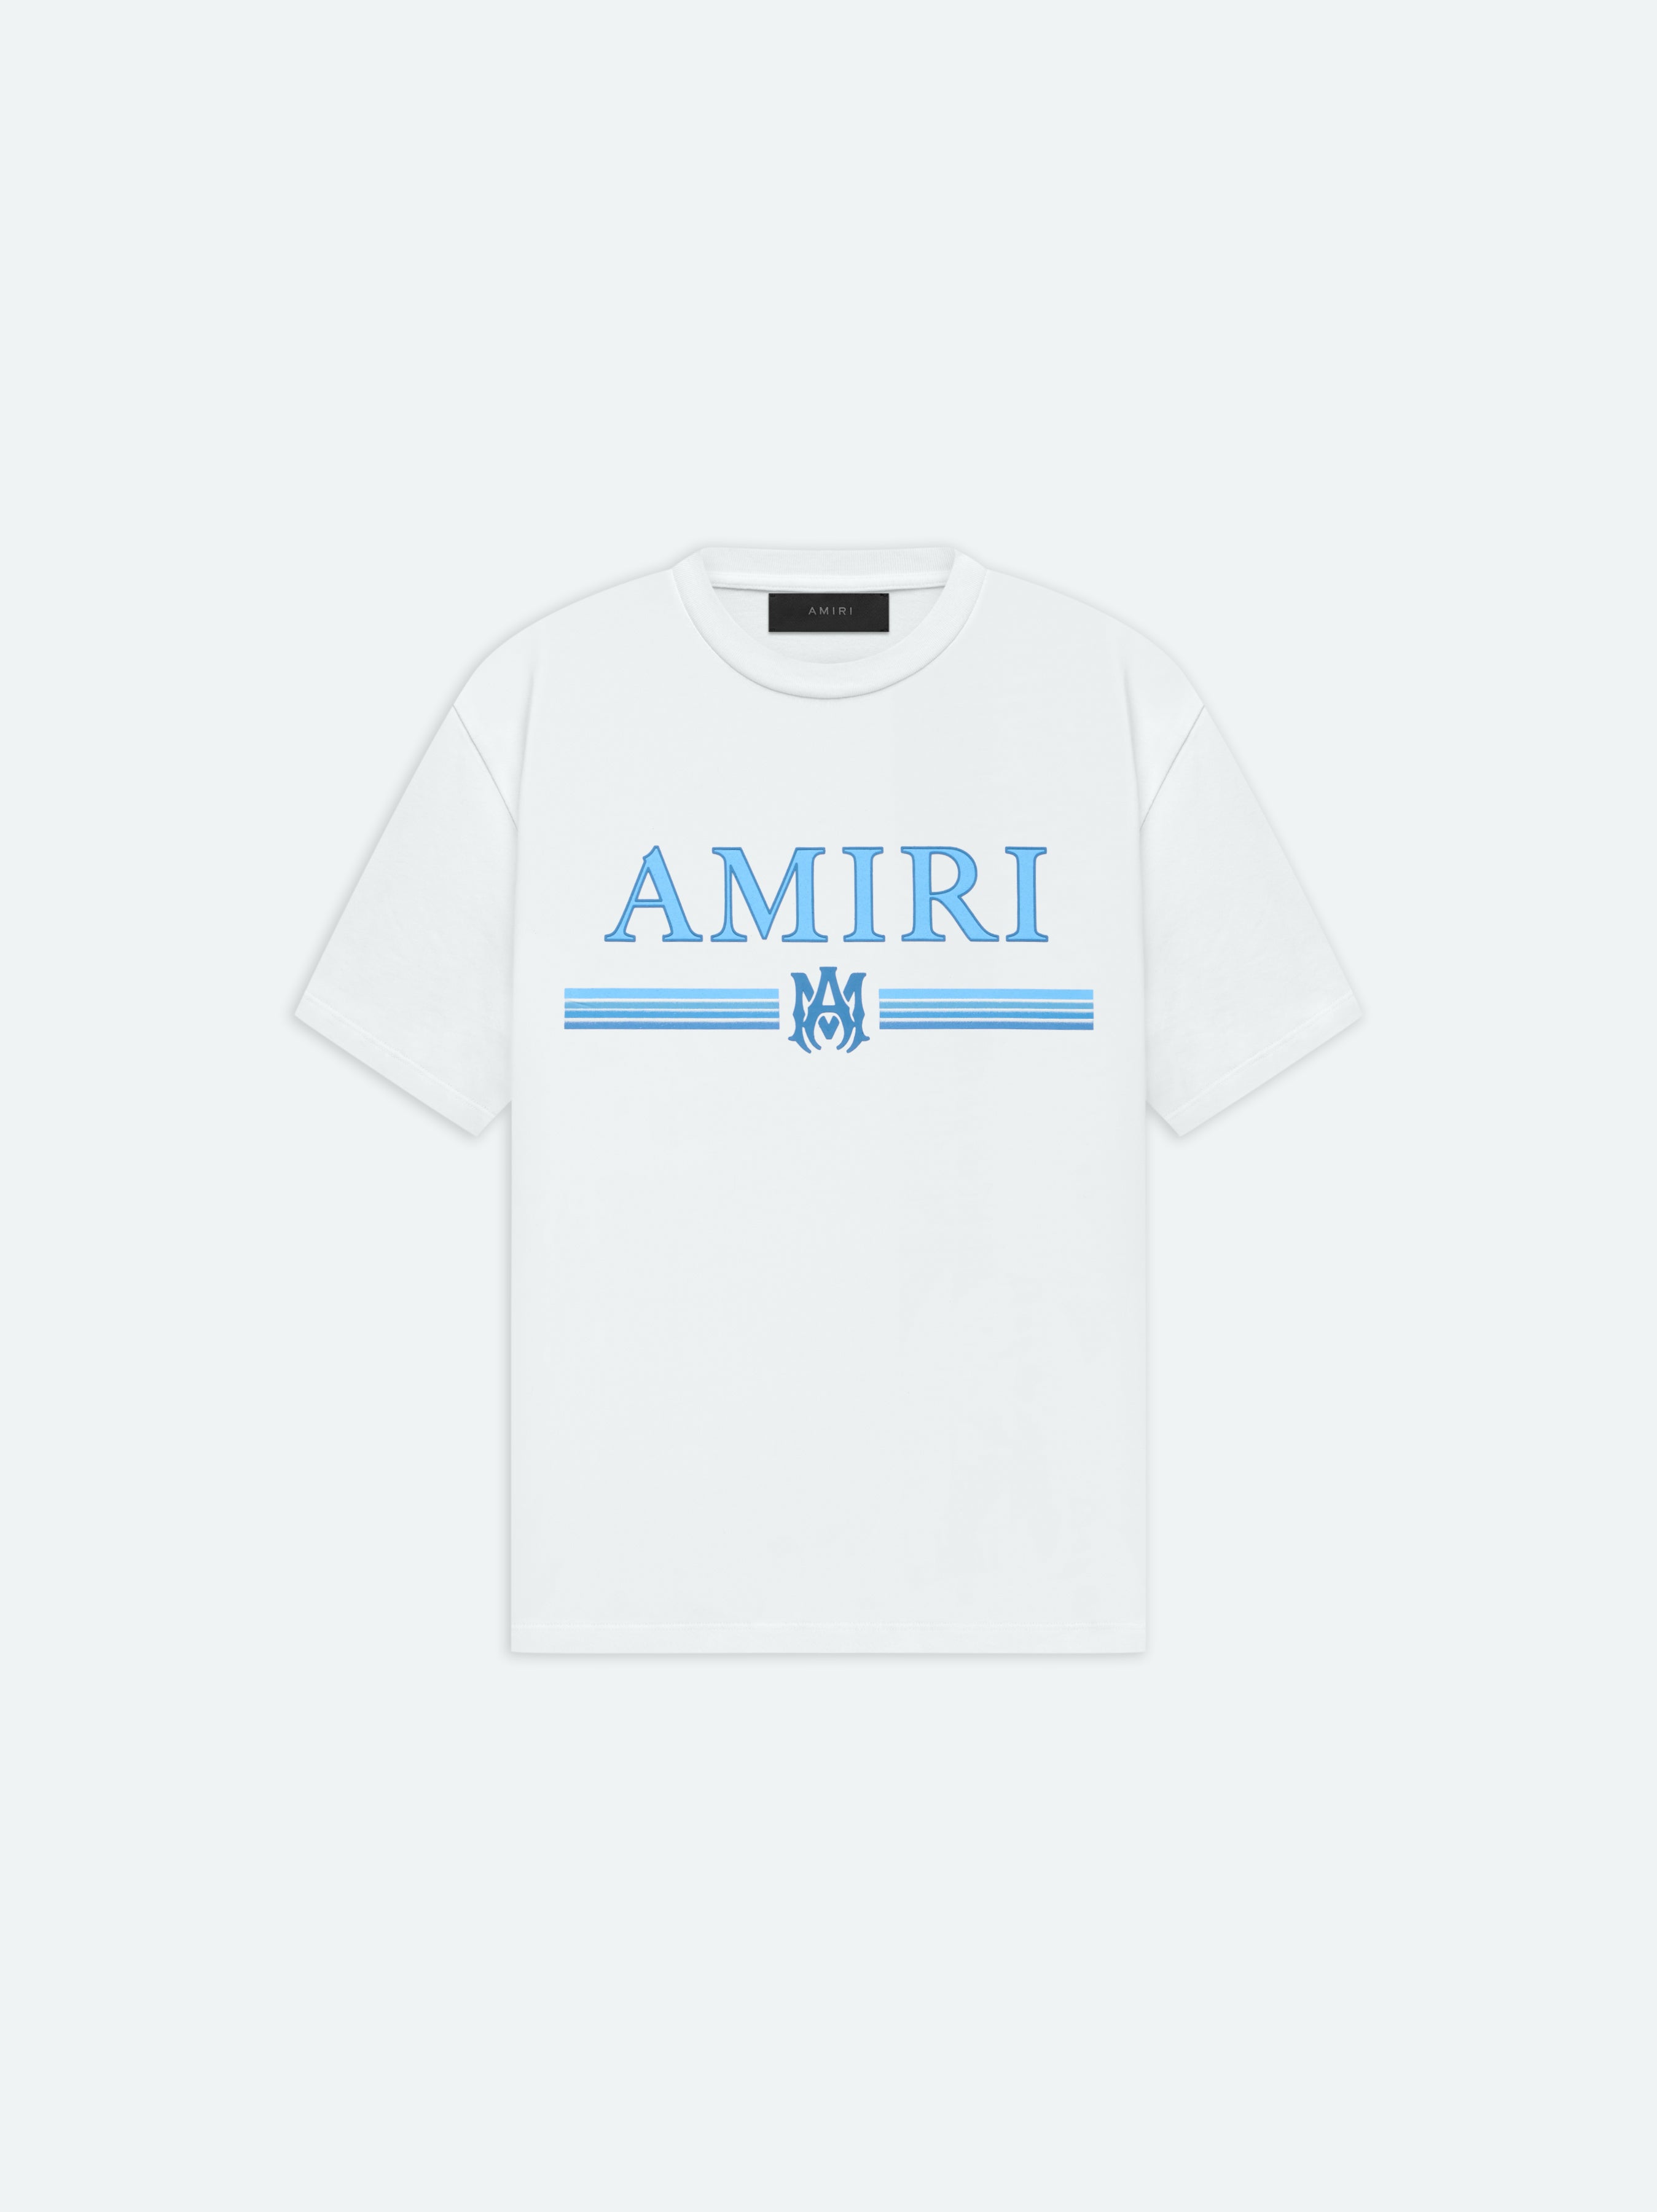 Product MA BAR TEE - White featured image